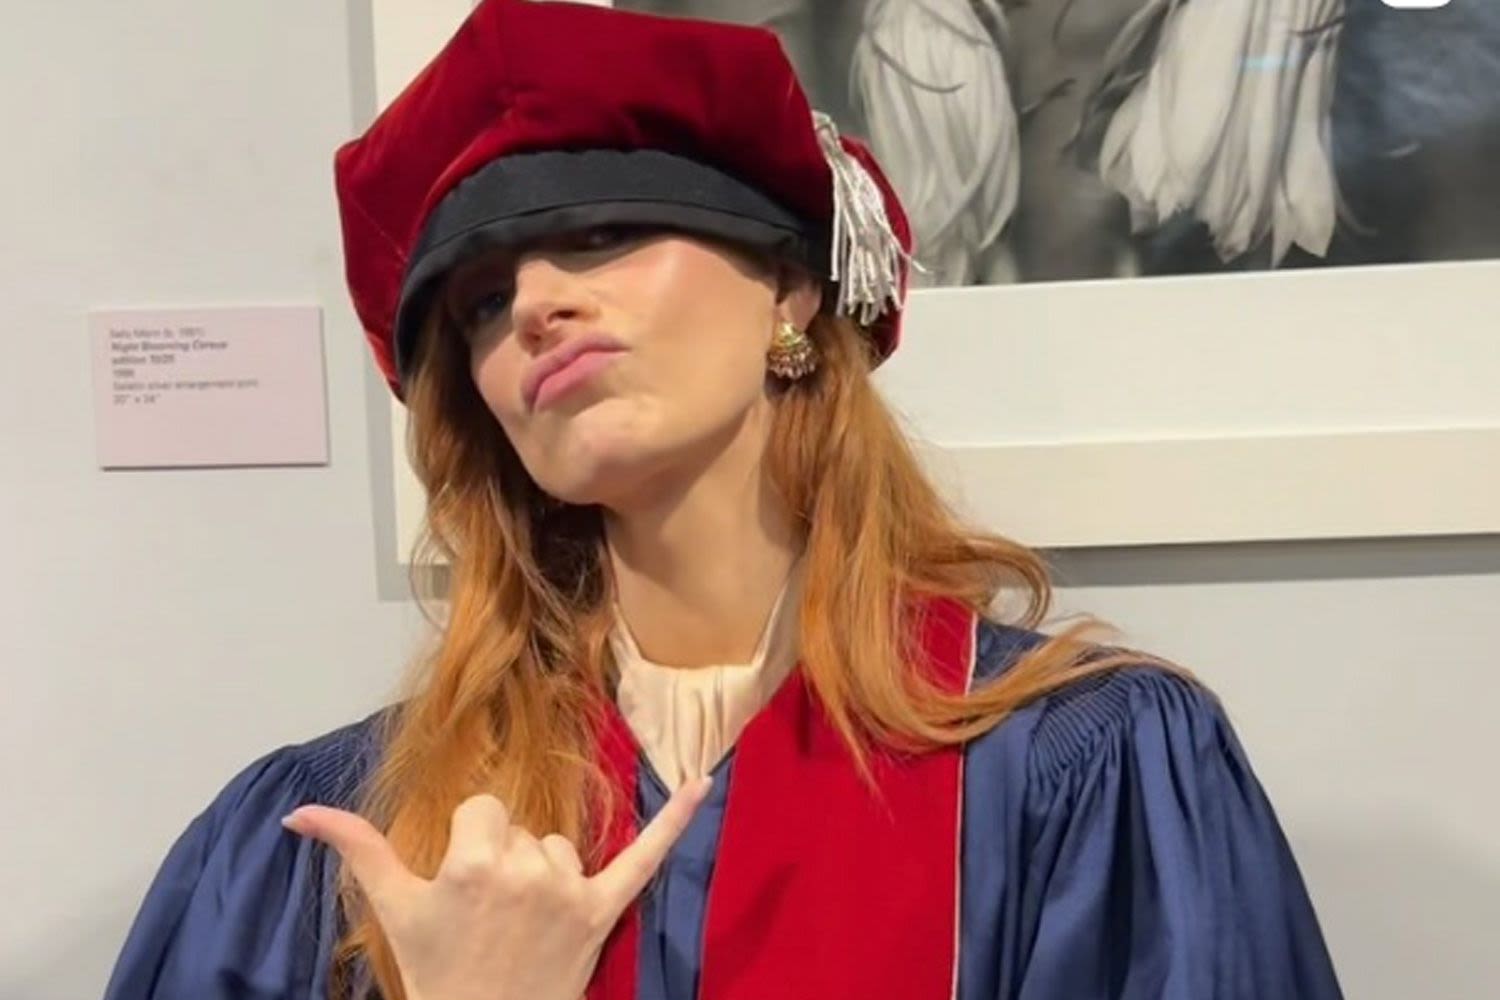 Jessica Chastain Shares Footage of Her Honorary Doctorate Ceremony at Juilliard: ‘Dr. Chastain Has a Nice Ring’